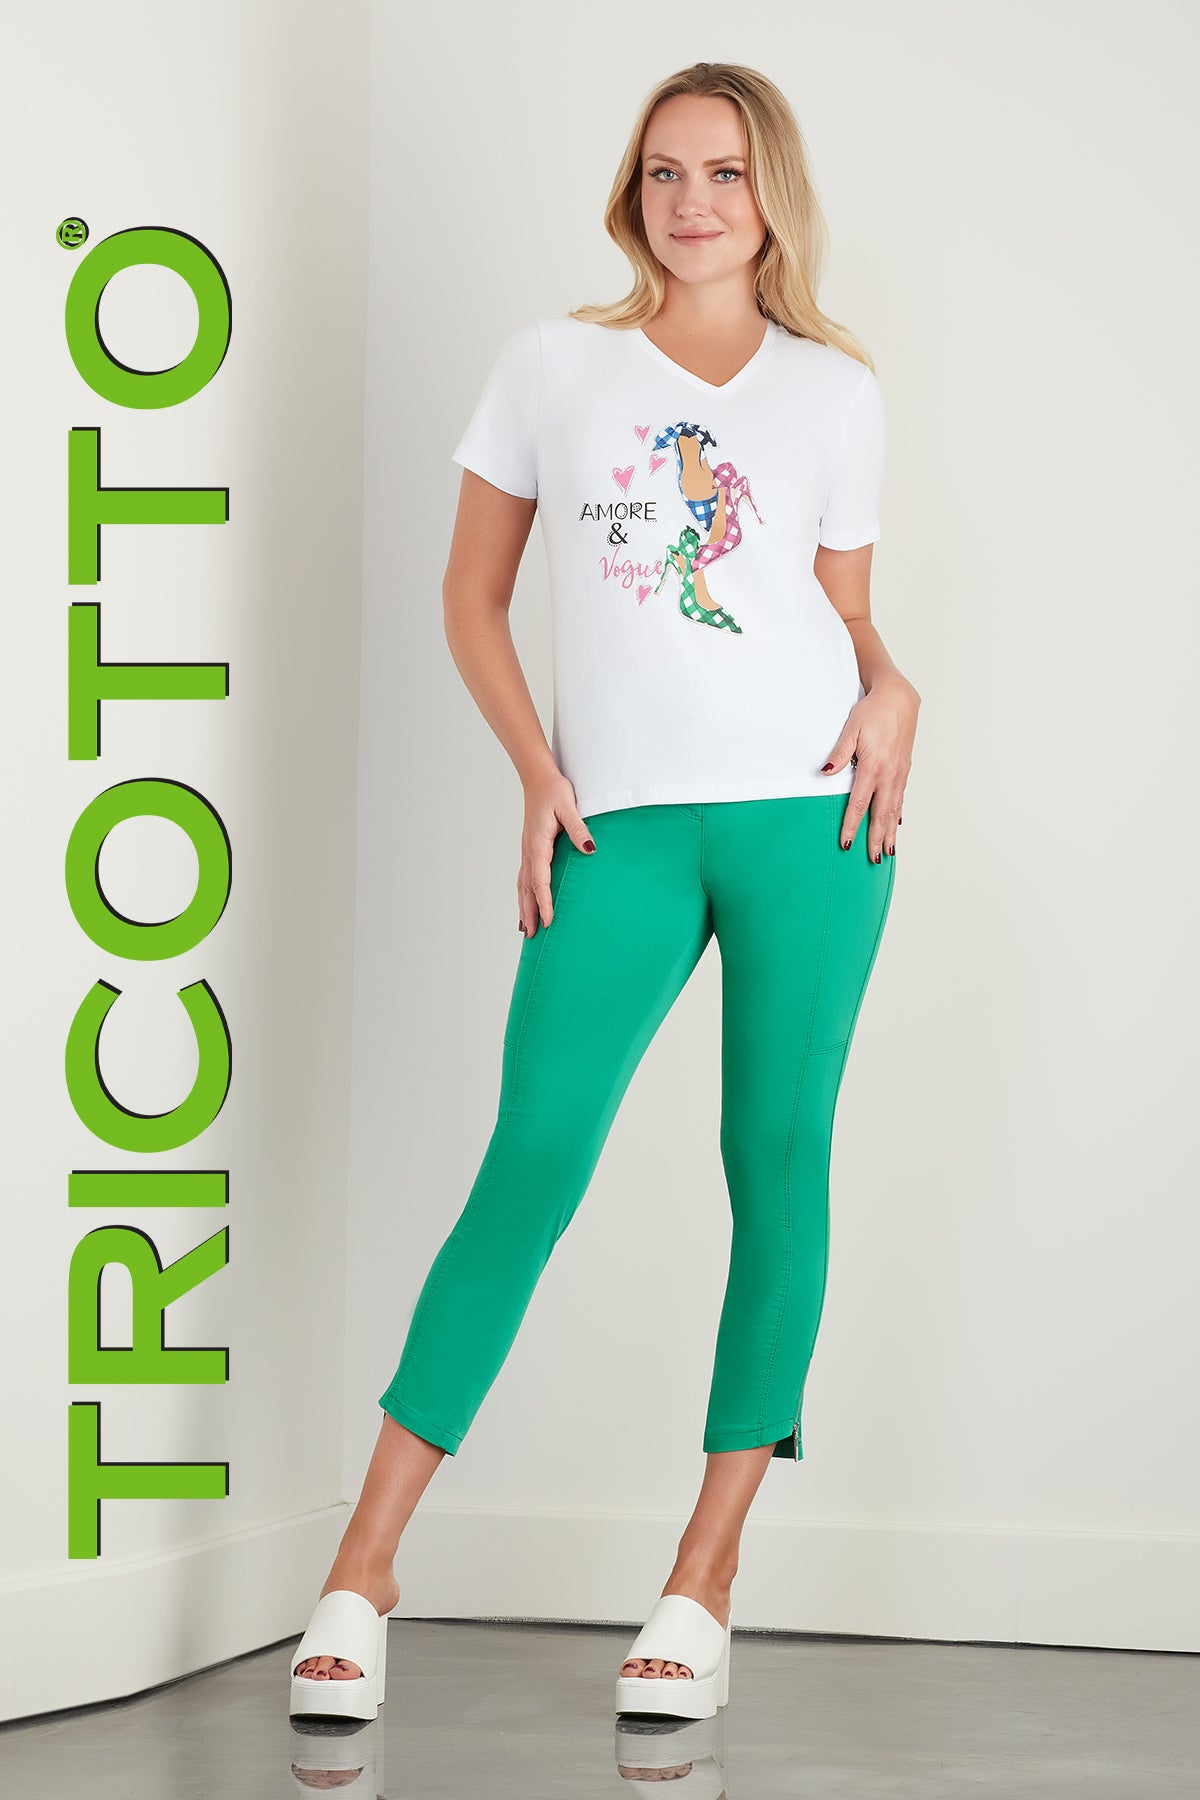 Tricotto High Heels White Sequin T-shirt-High Heels White-Pink-Green Sequin T-shirt